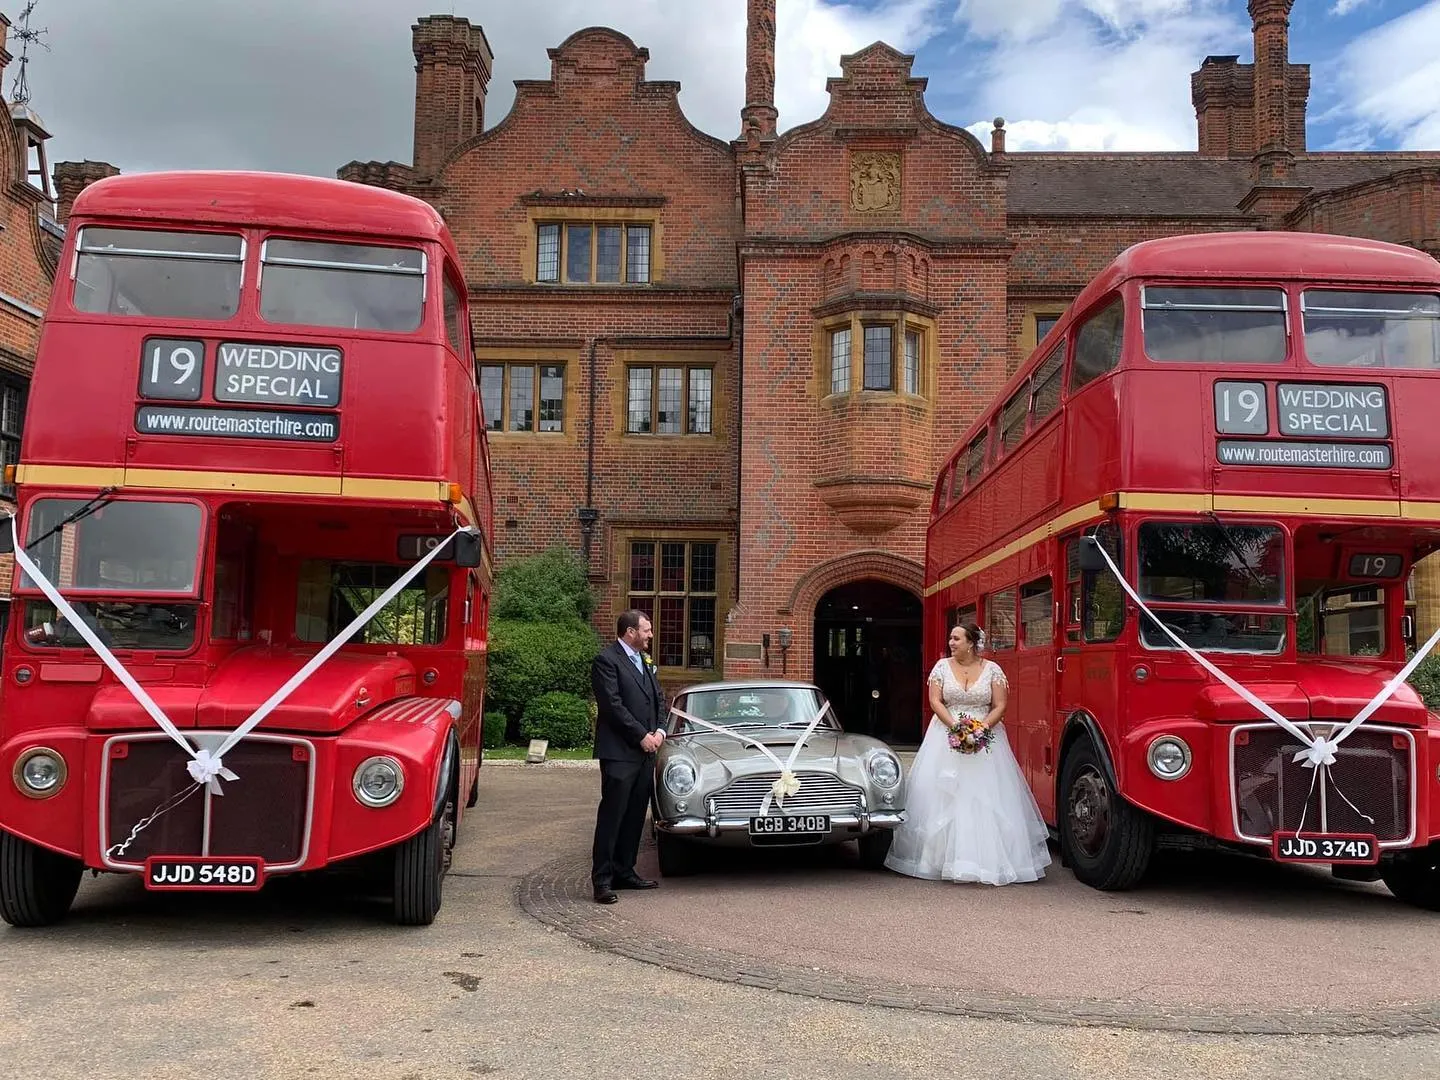 Two Matching Vintage Double Decker Red Routemaster Buses at a wedding venue with a Classic Aston Martin in the middle. Bride and Groom are standing by the buses posing for photos. All three vehicles have matching white ribbons